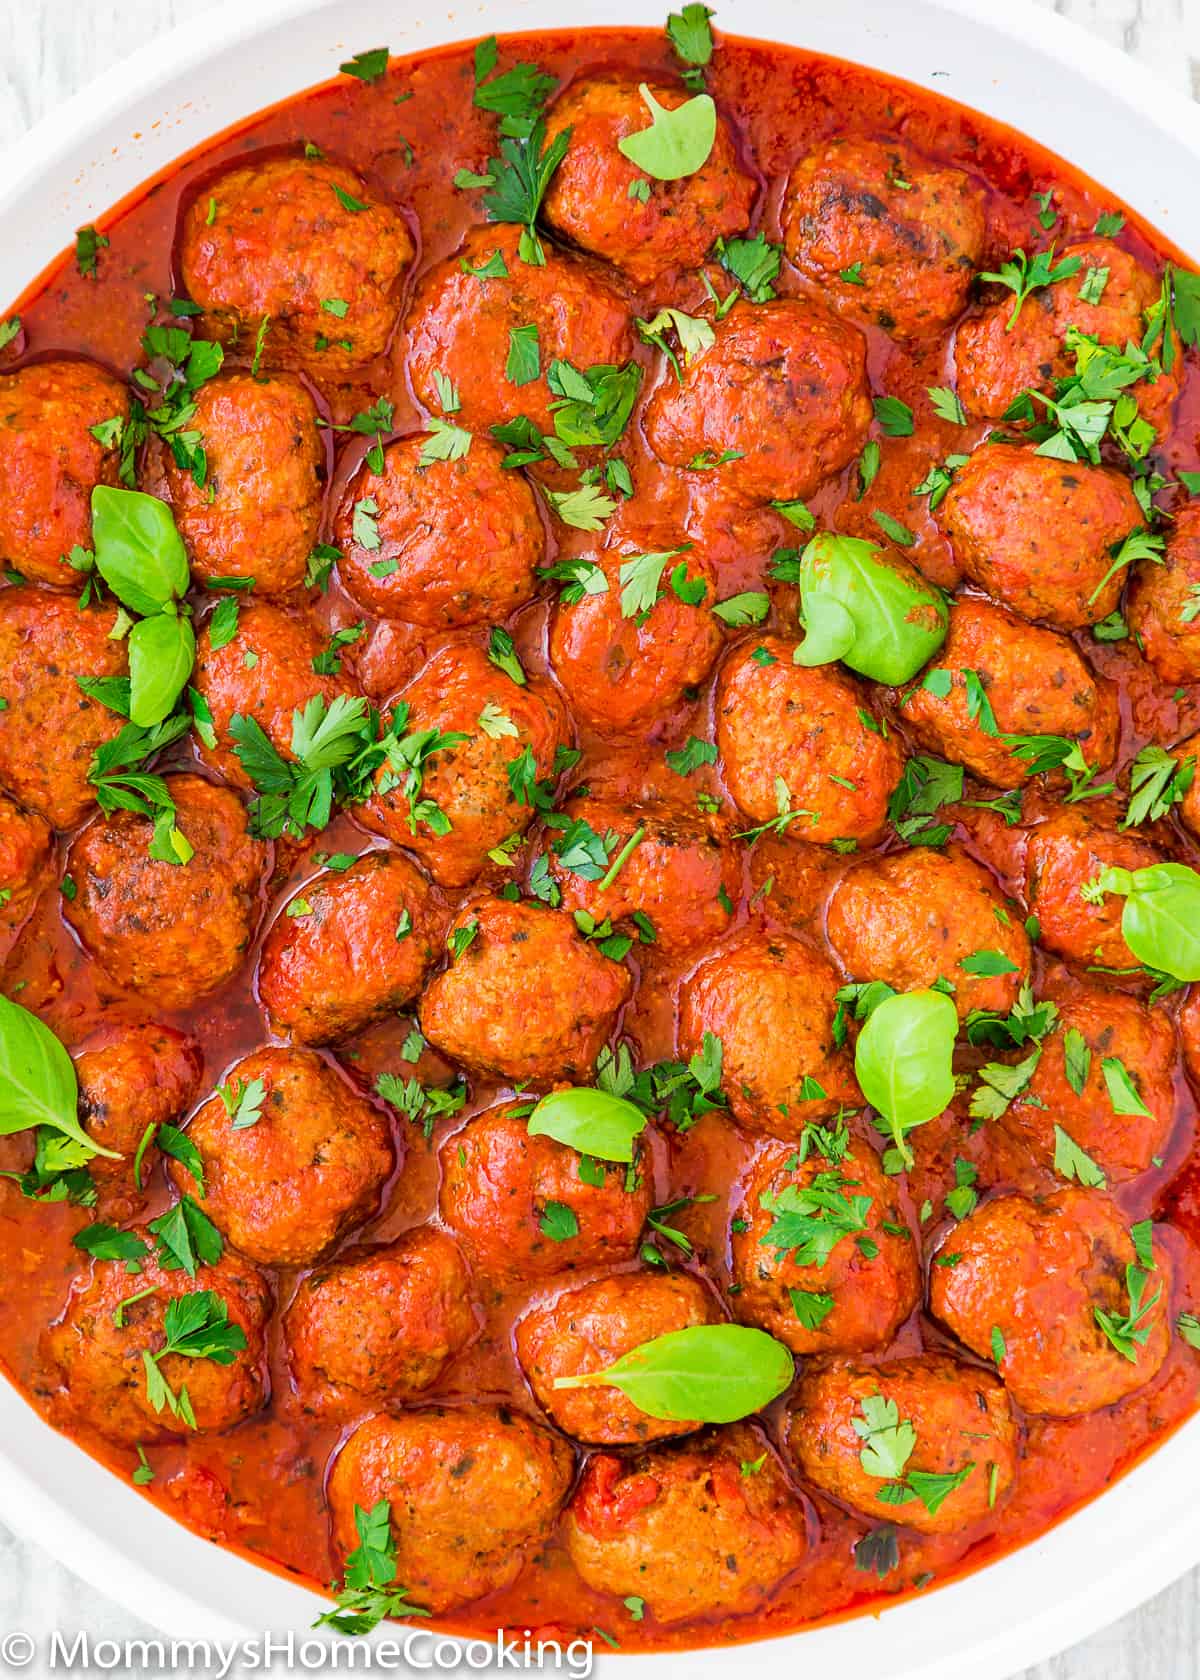 Eggless Italian Meatballs garnished with parsley and basil